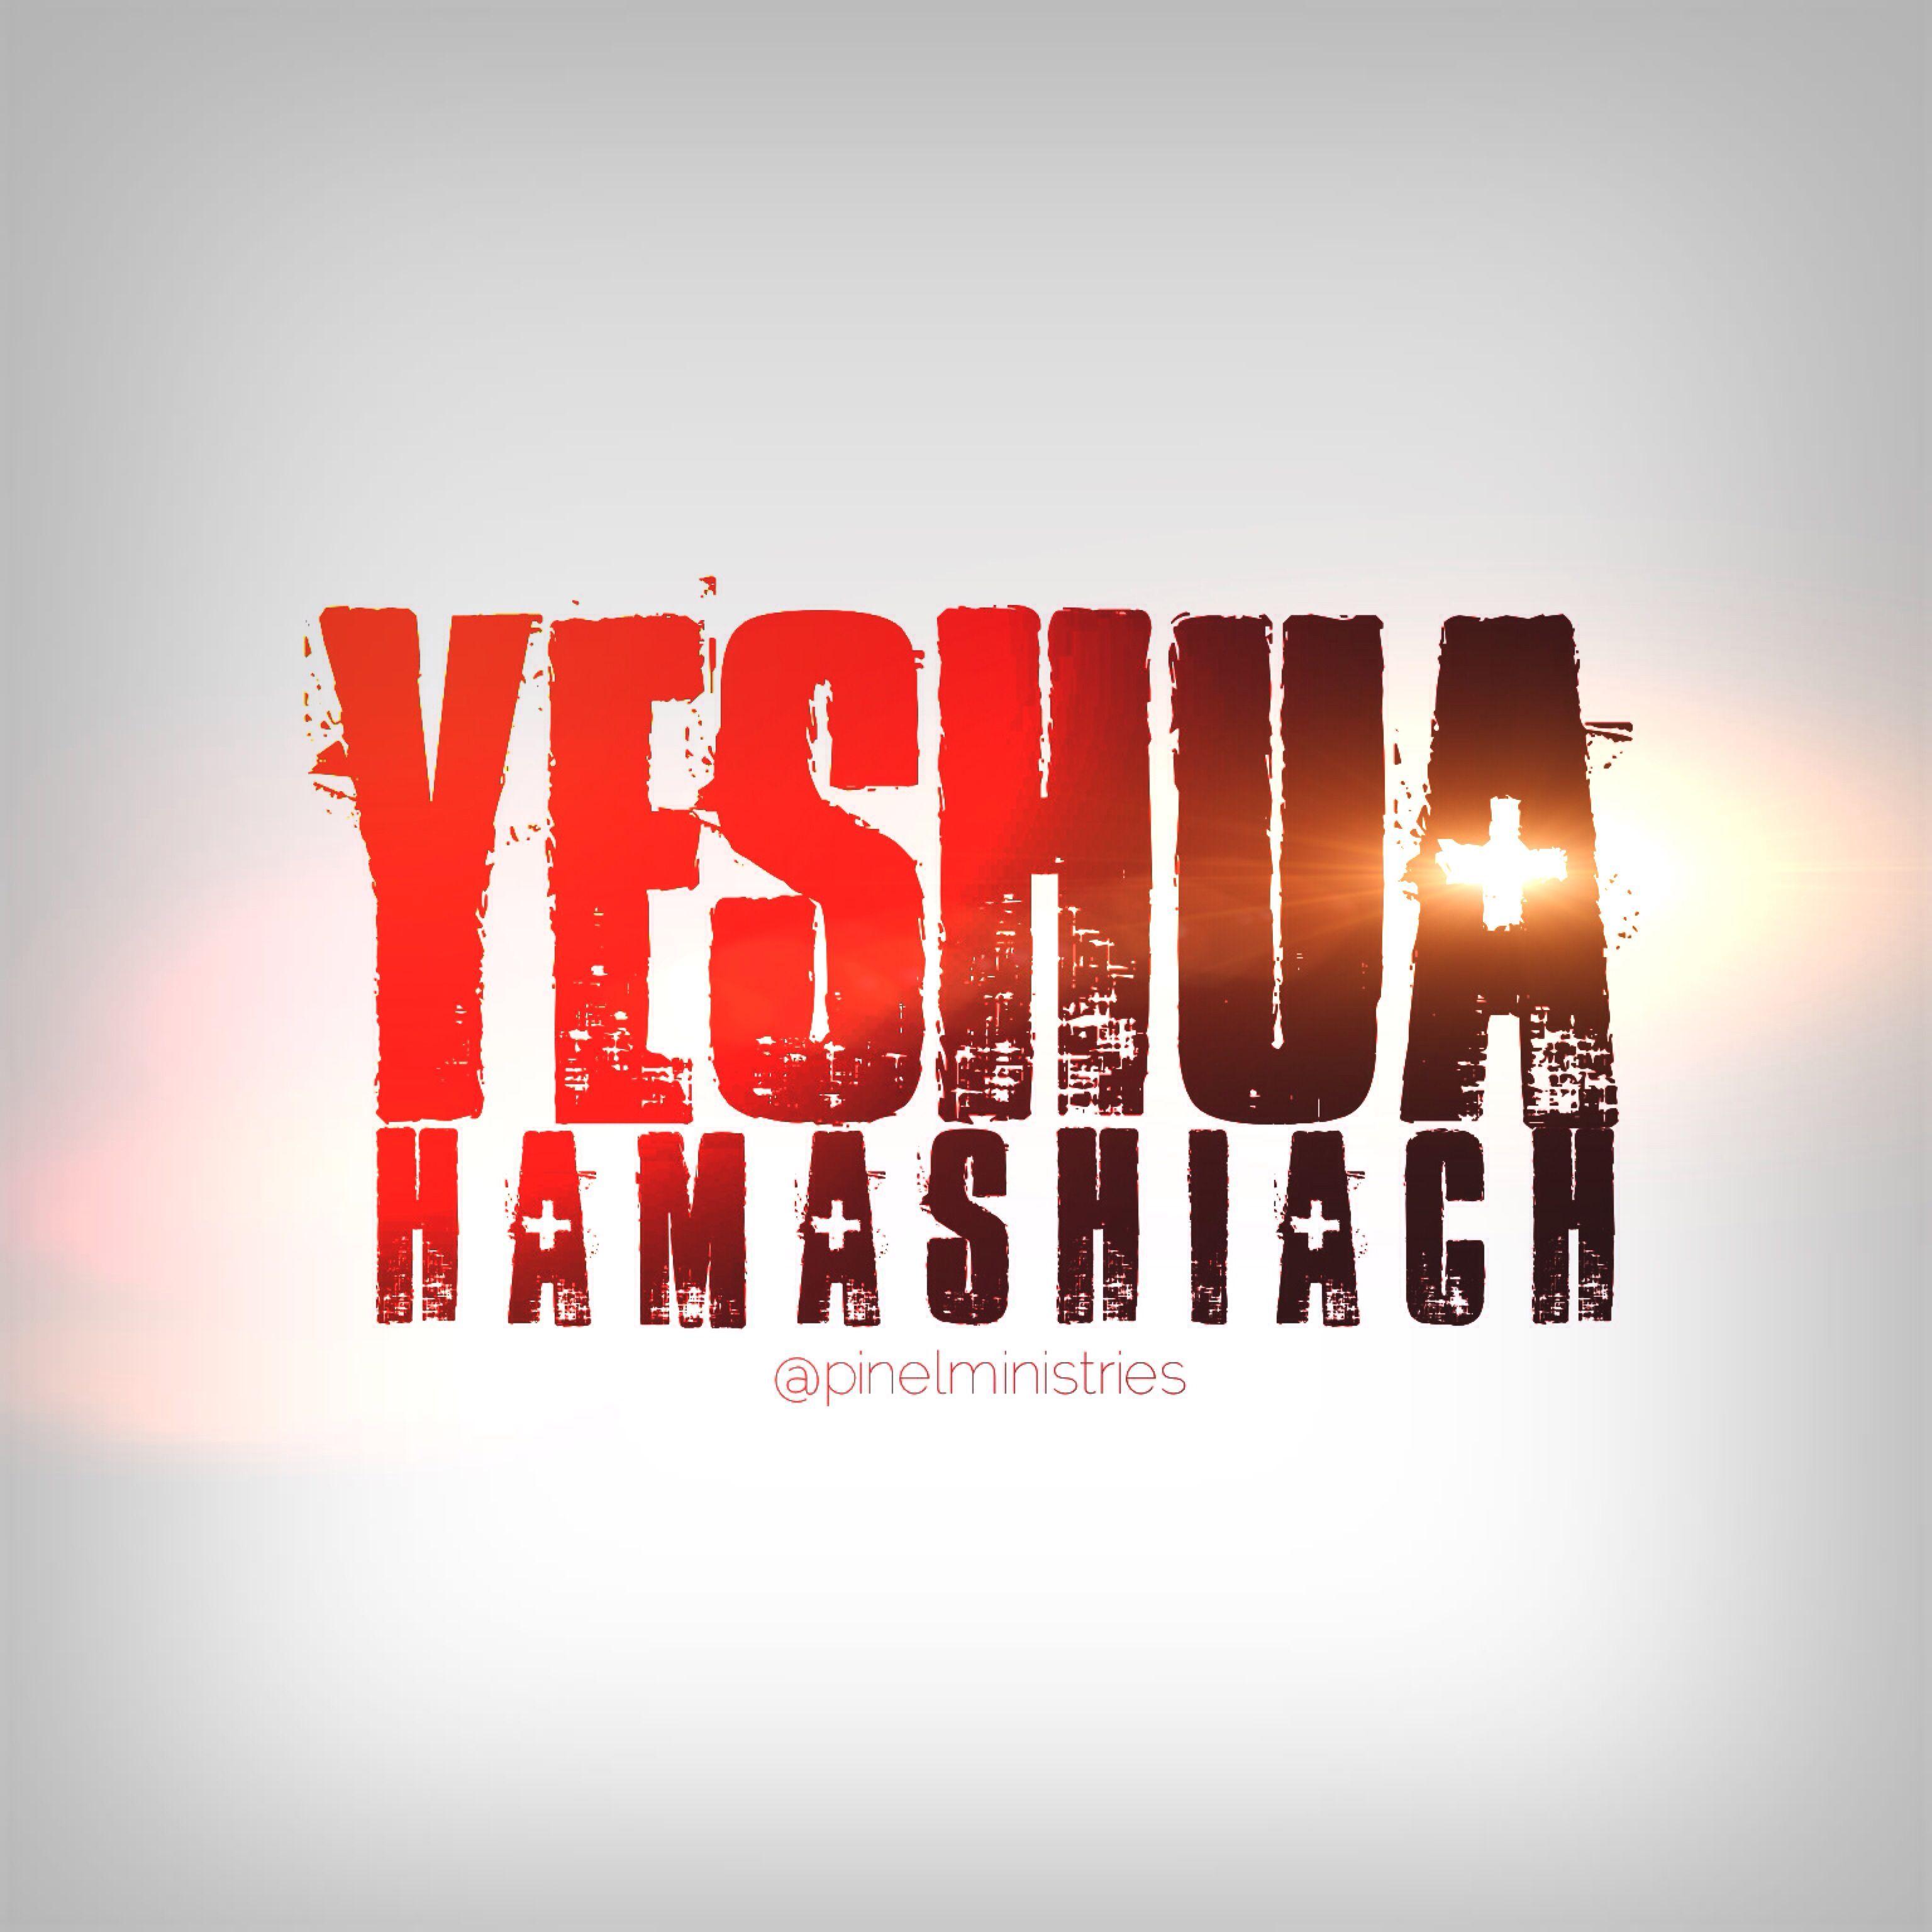 Free download Yeshua Wallpapers 1920x1080 for your Desktop Mobile   Tablet  Explore 78 Yeshua Wallpaper 